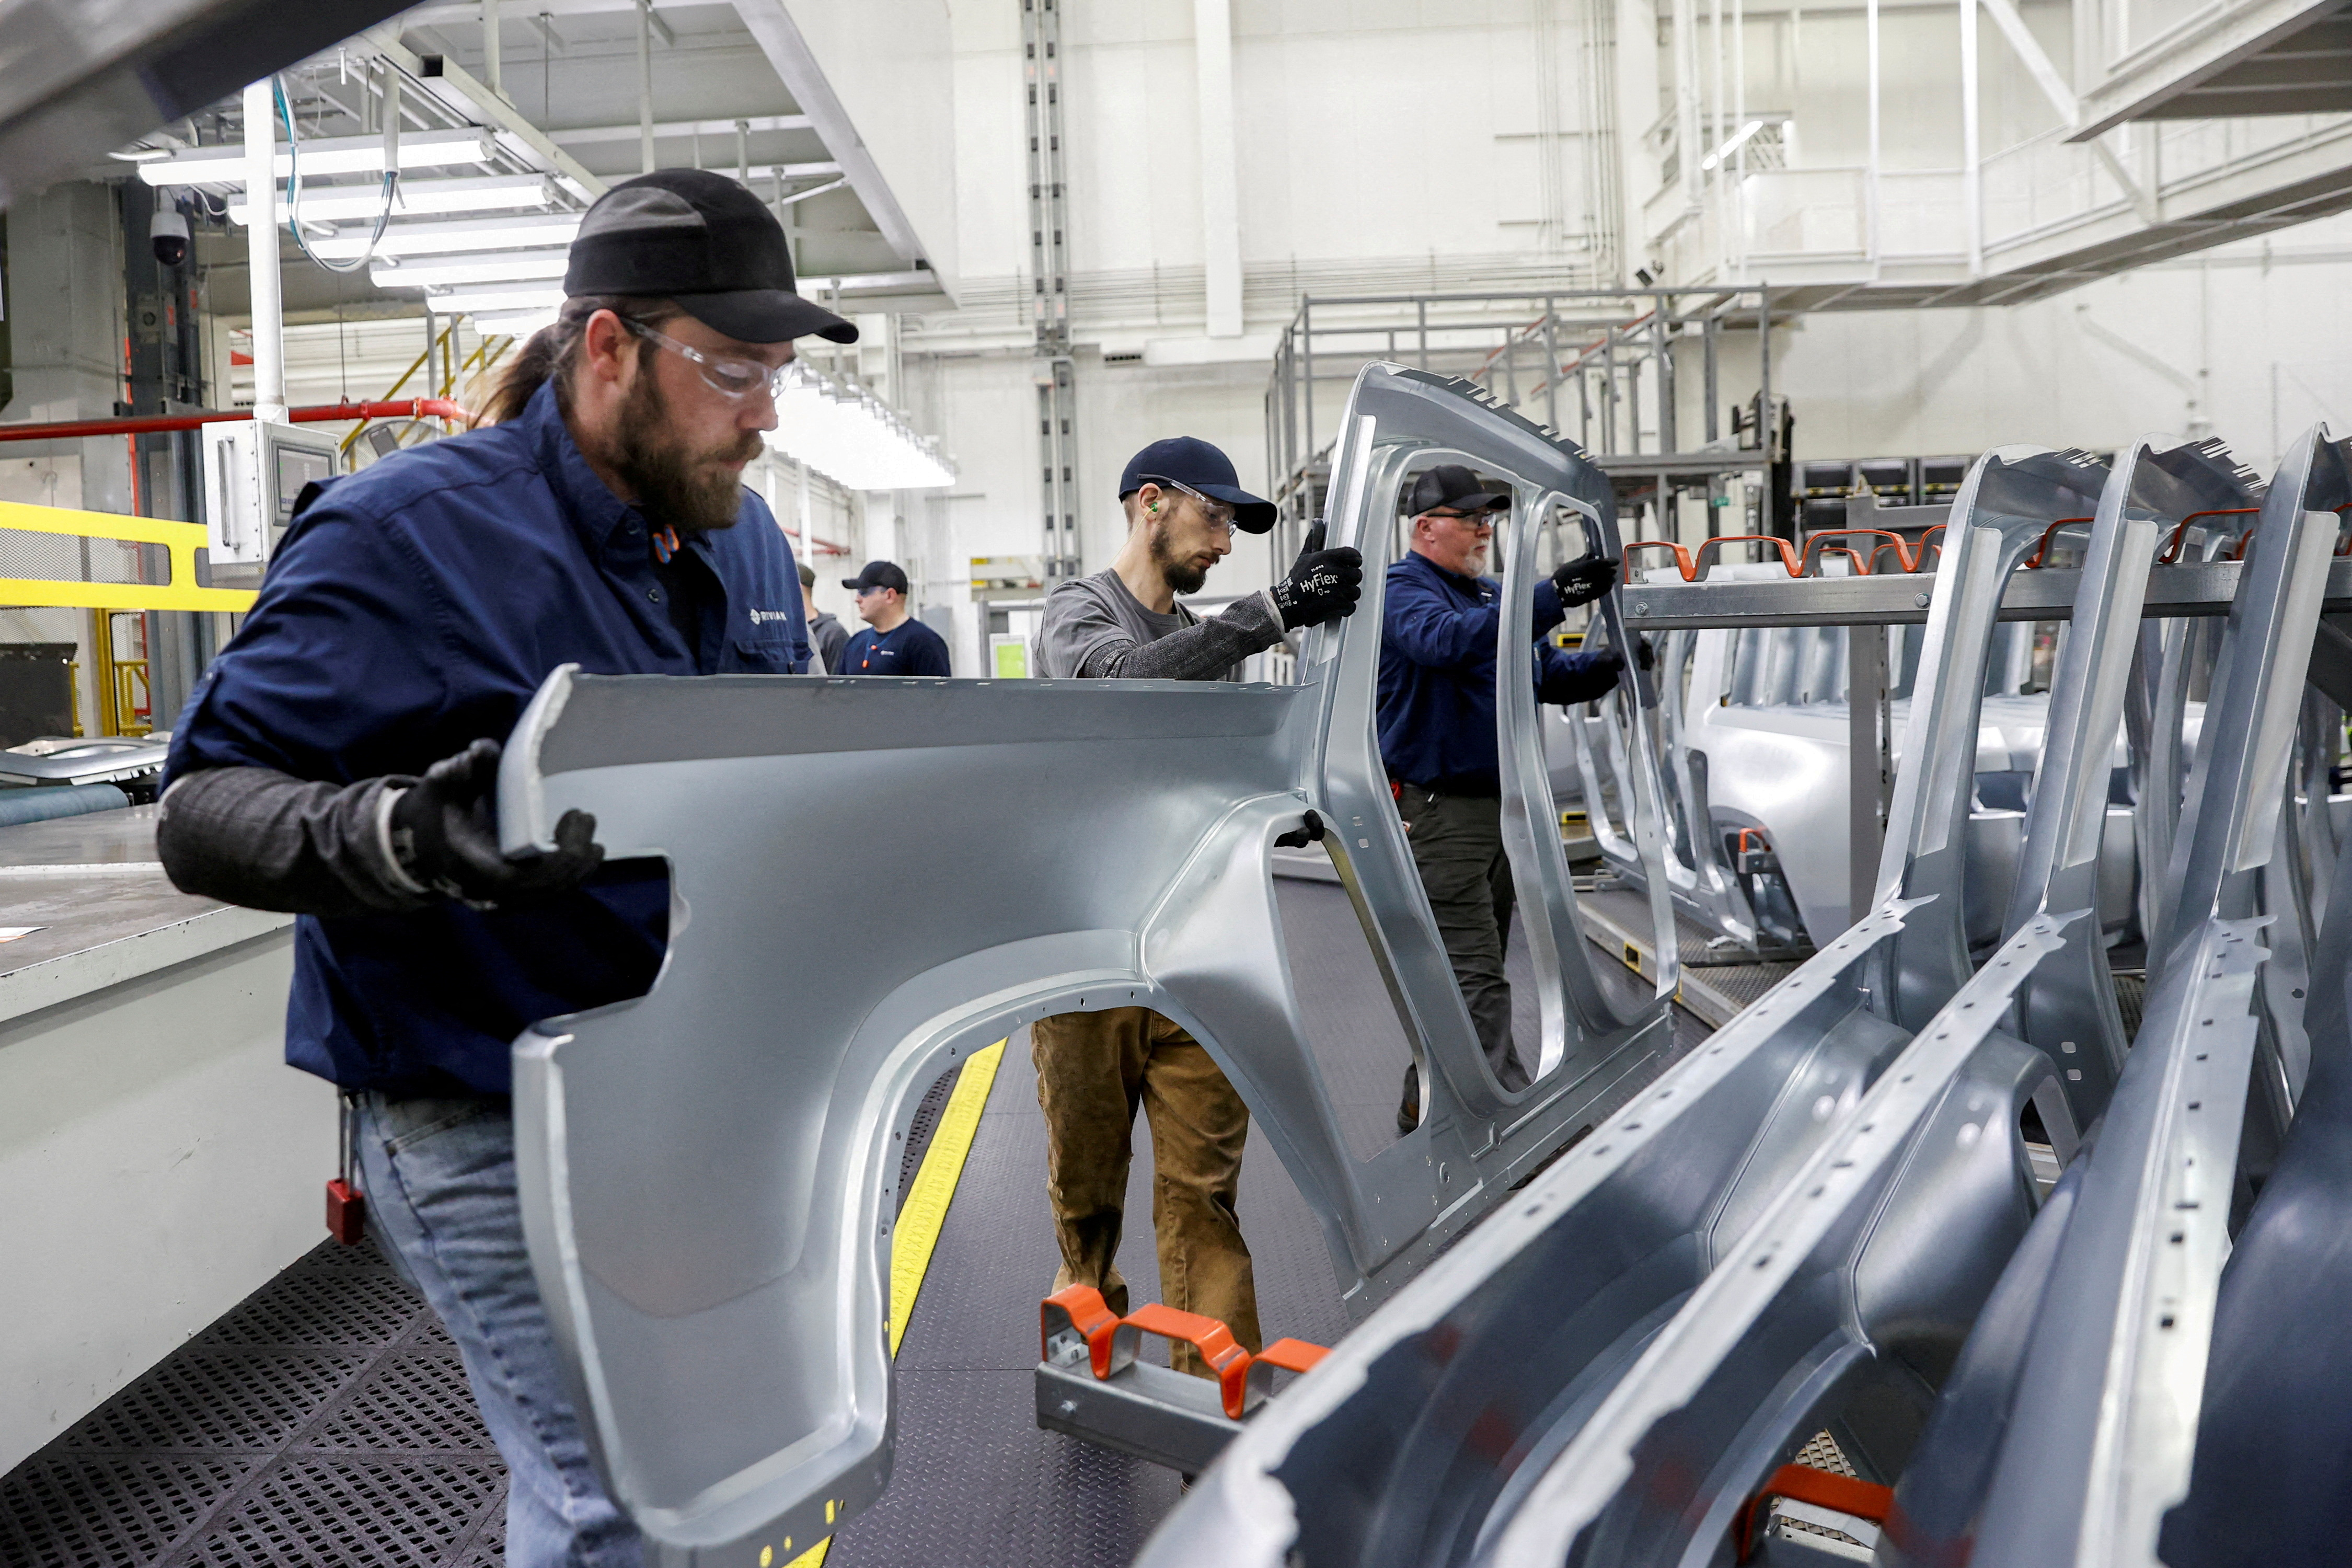 Startup Rivian Automotive's electric vehicle factory in Normal